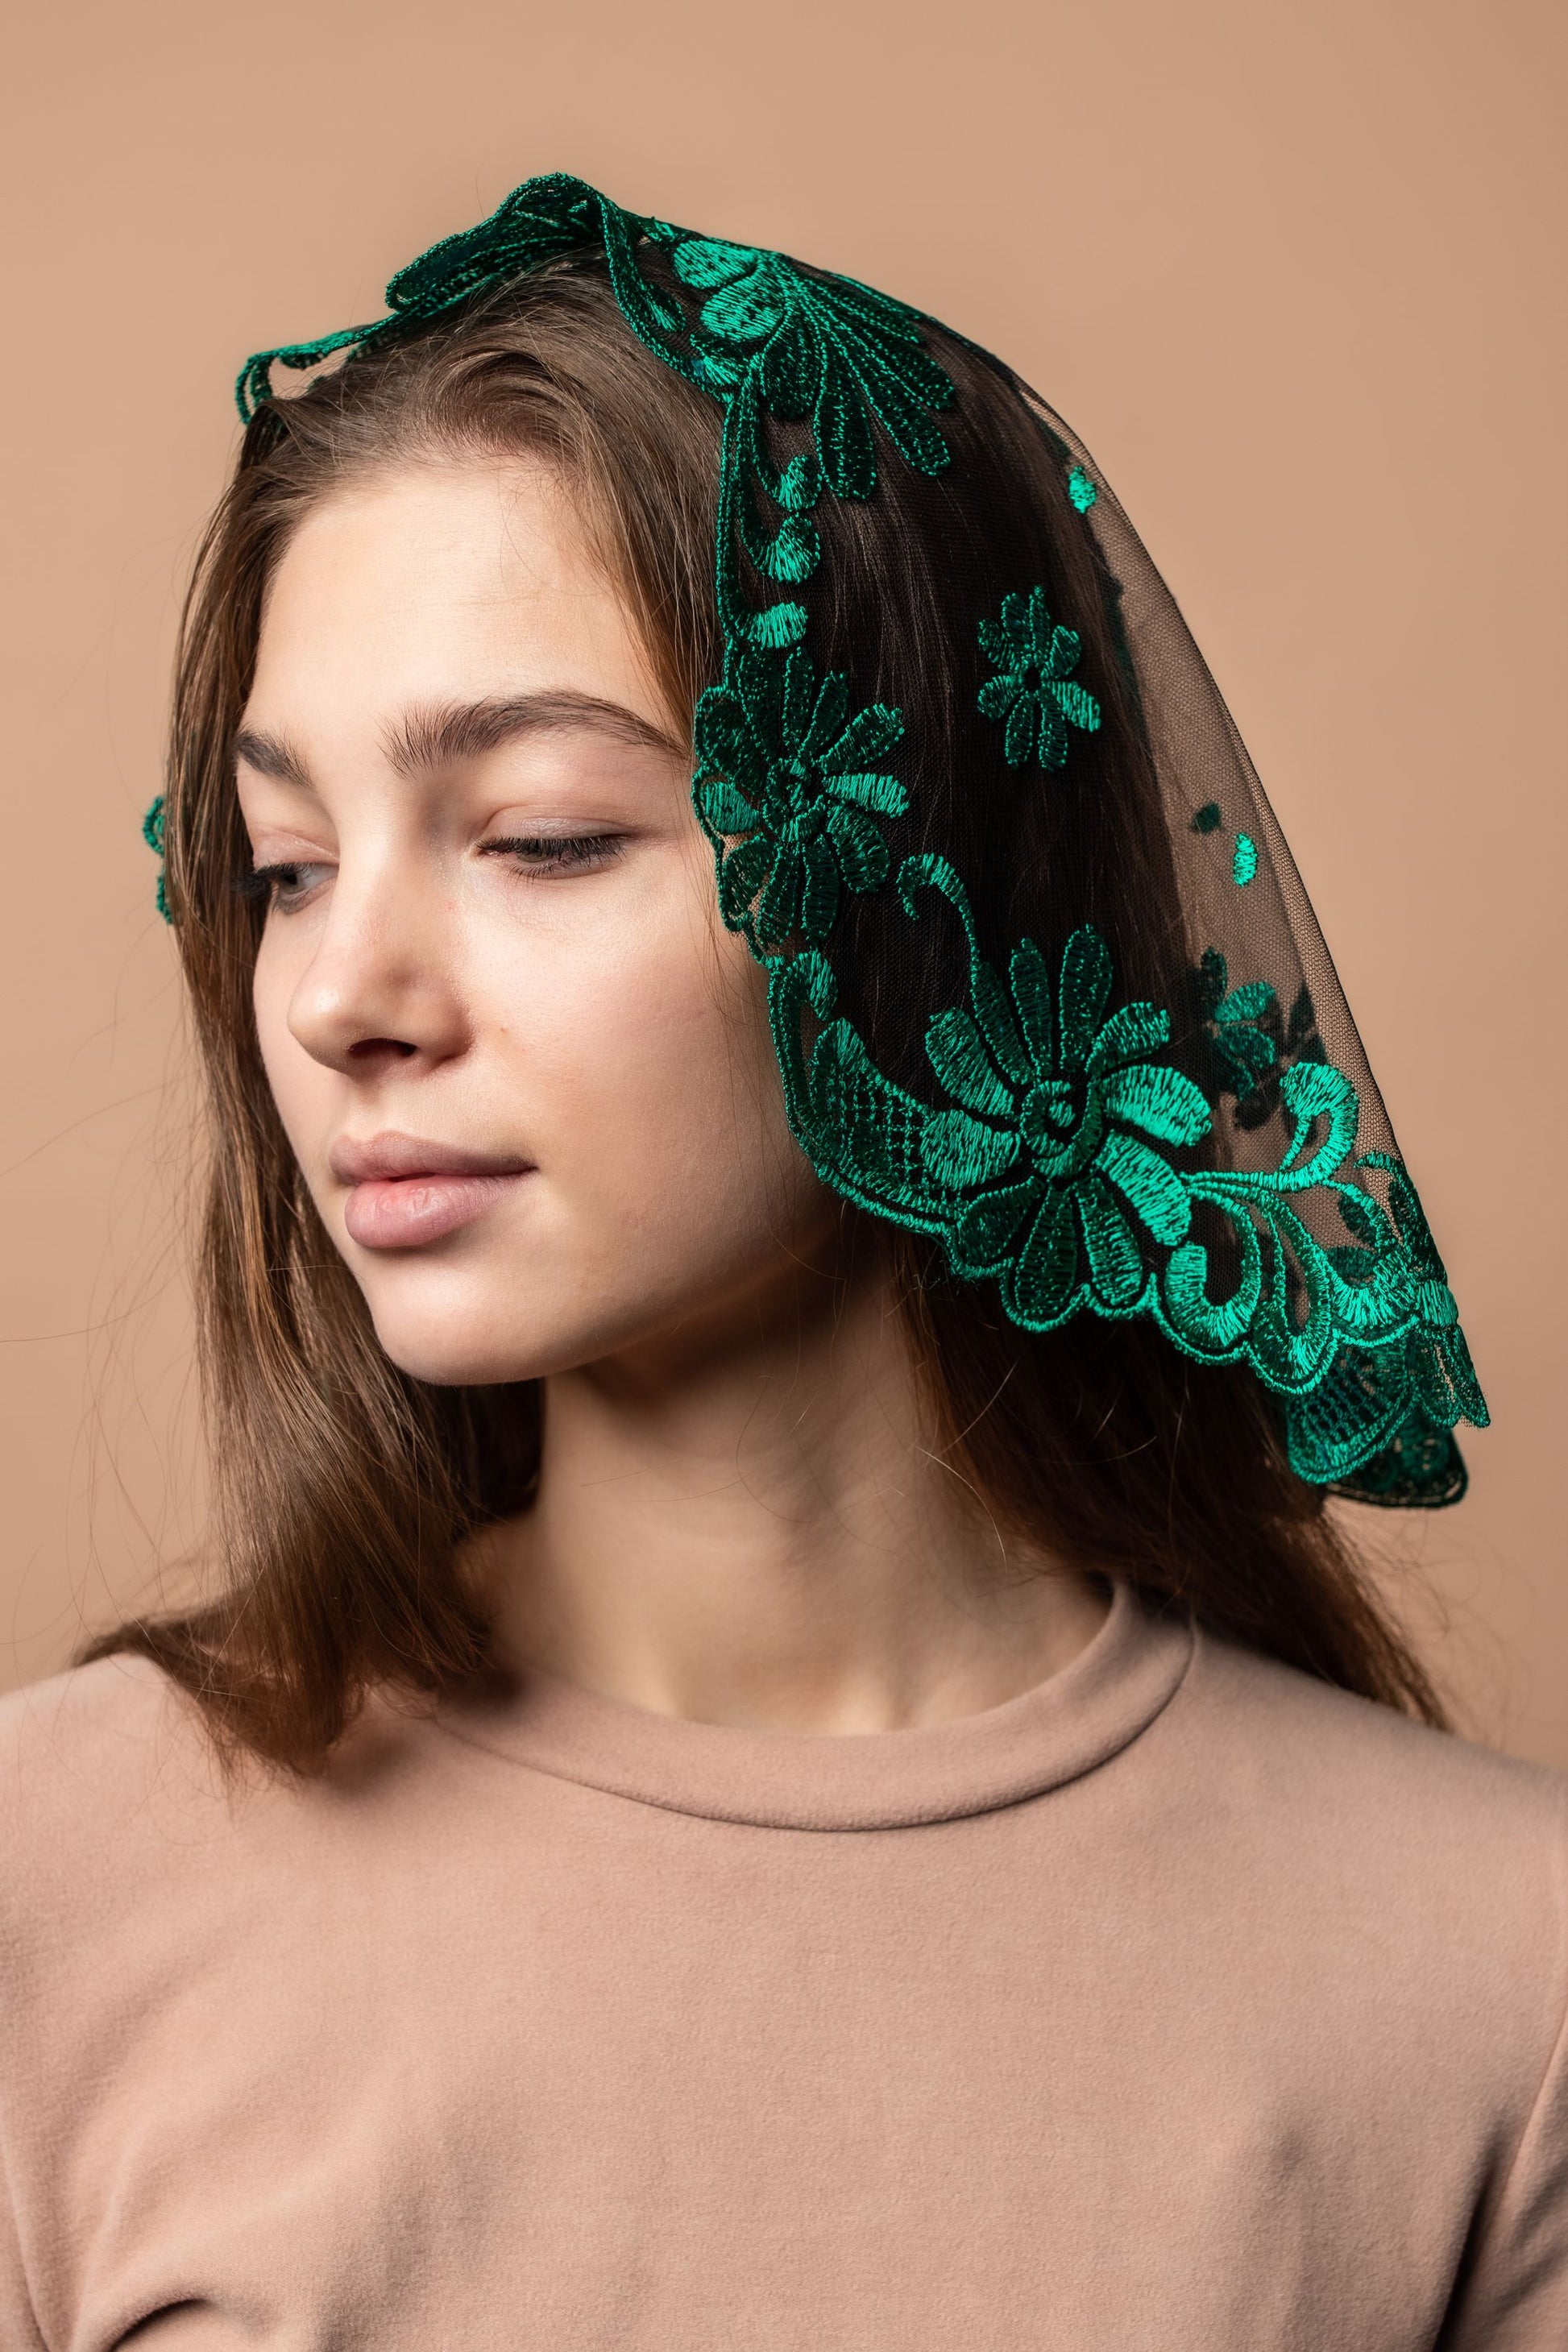 NEW!! Bestseller veil in new green color - MariaVeils